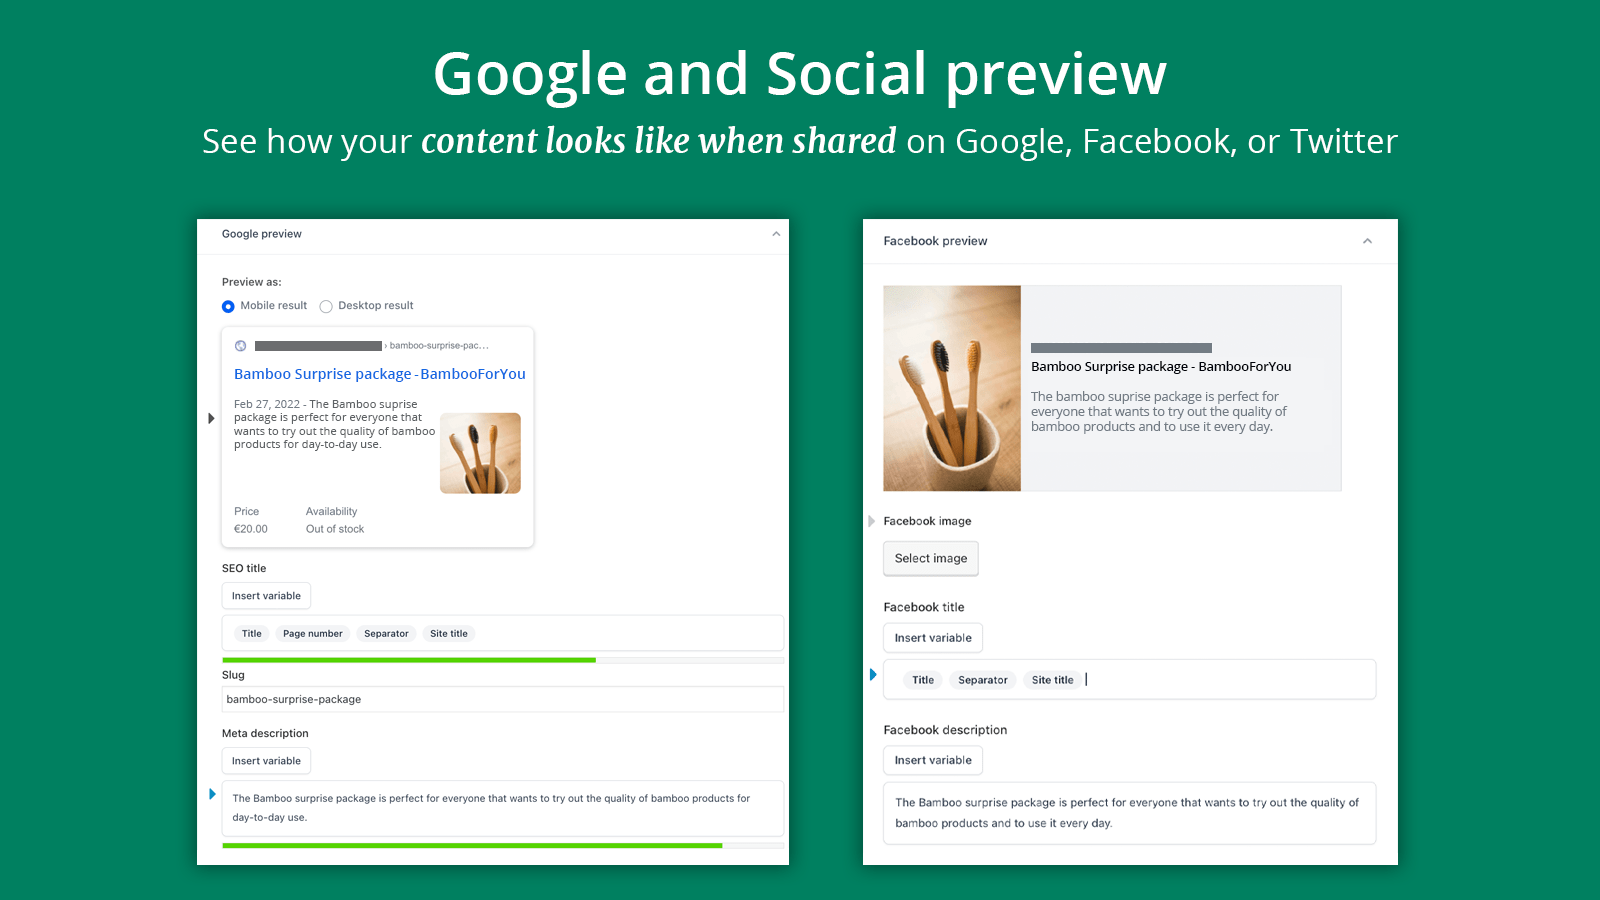 The Google and Social preview makes shared content look good